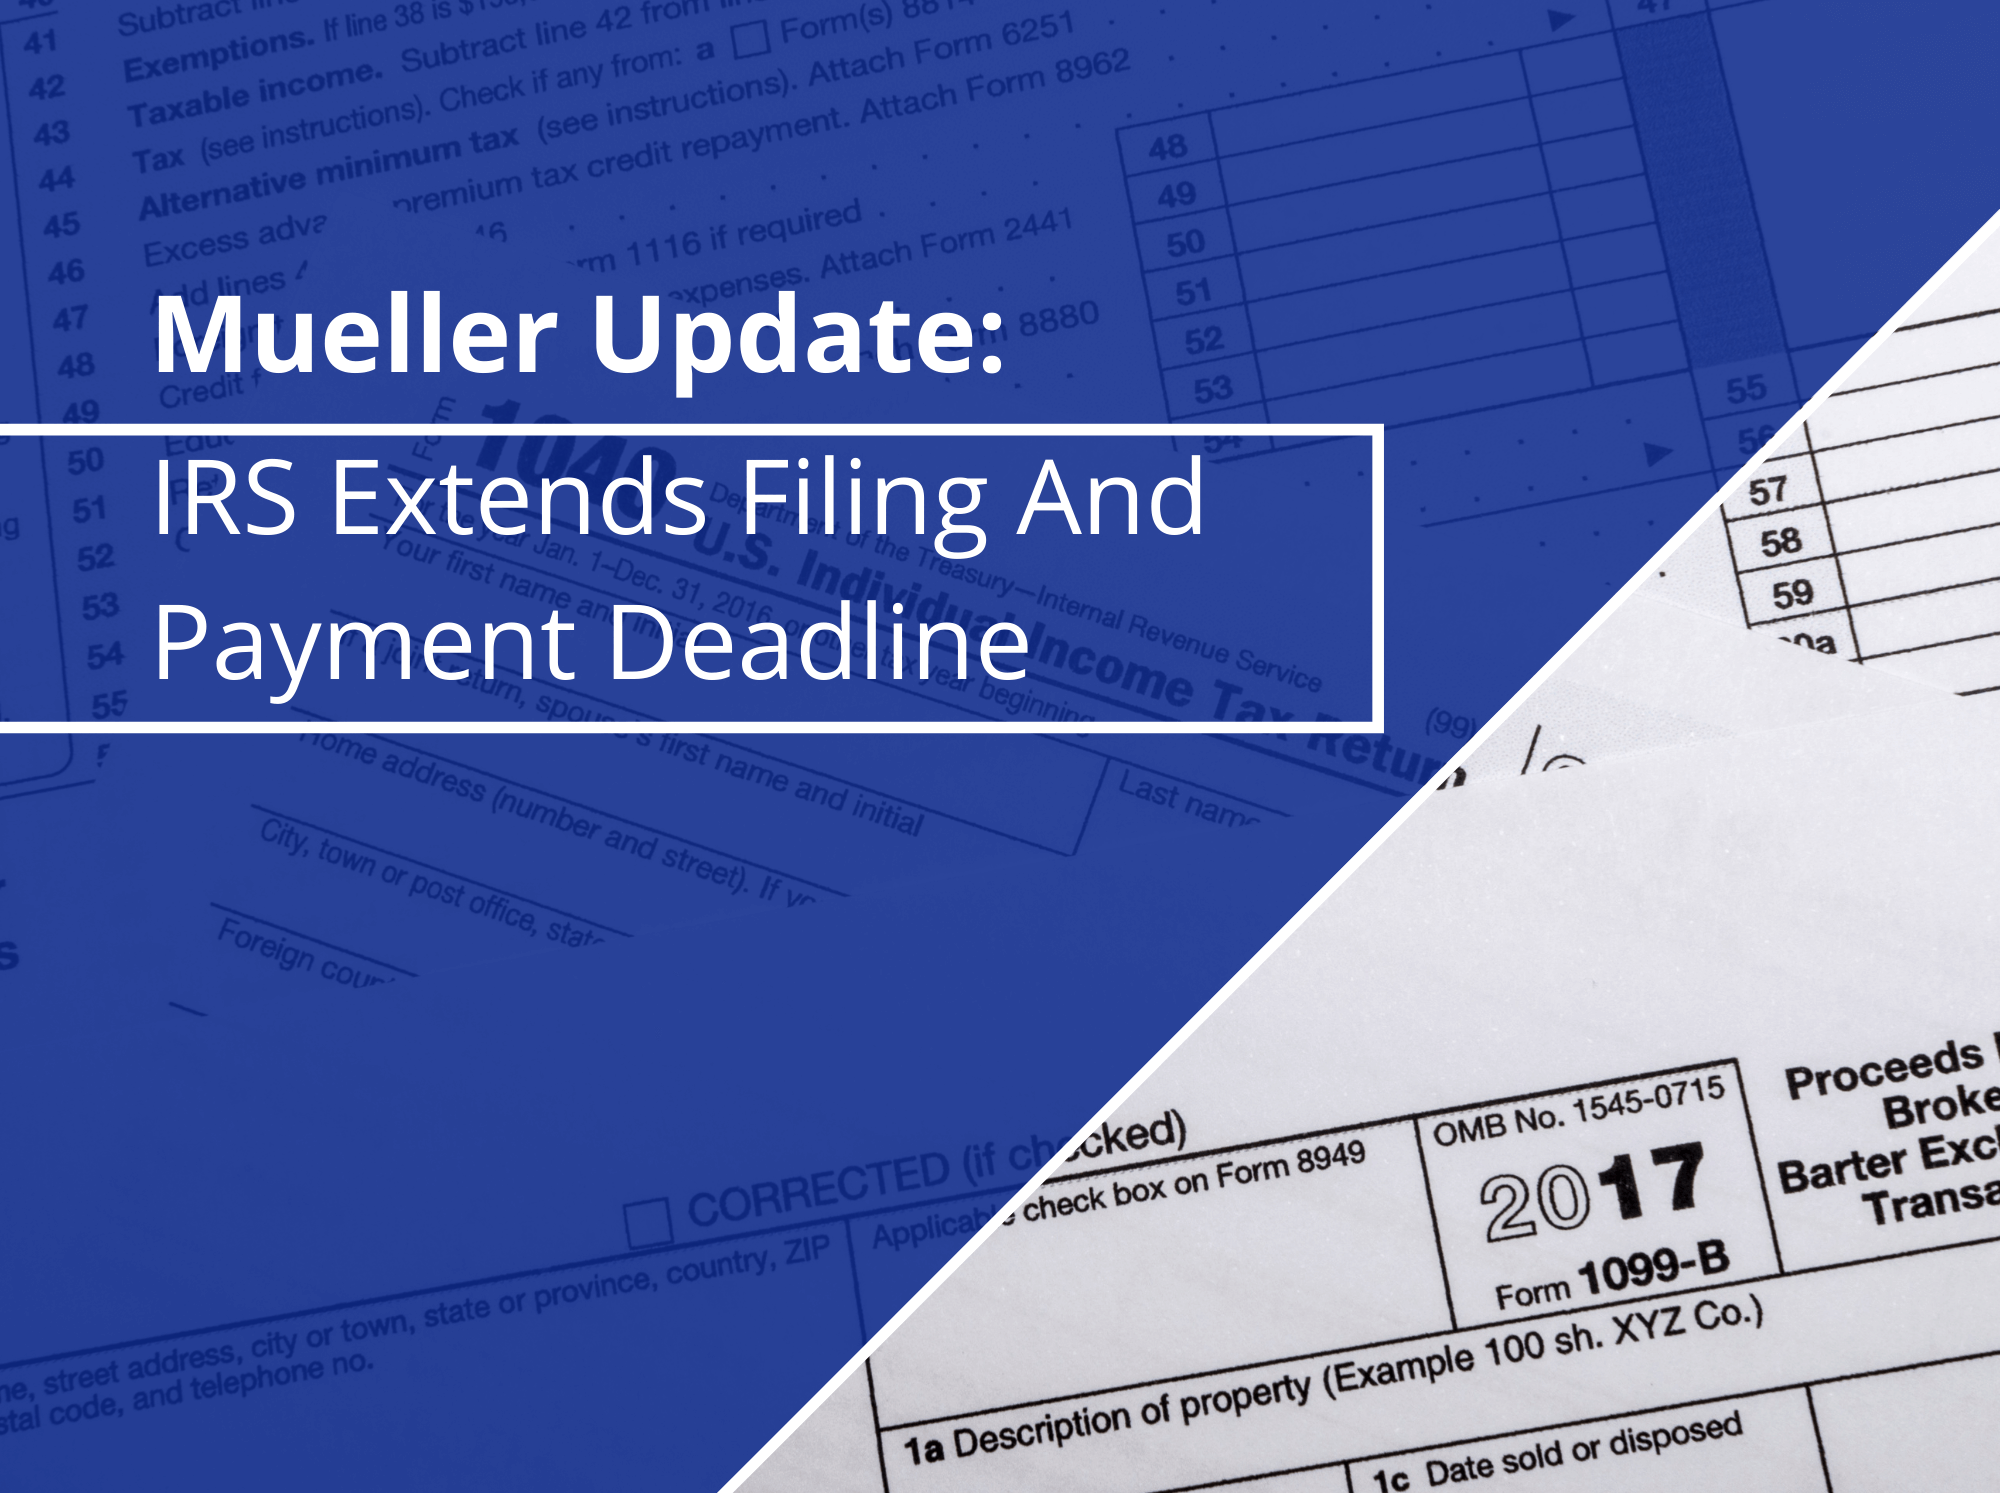 The IRS Extends Filing and Payment Deadline